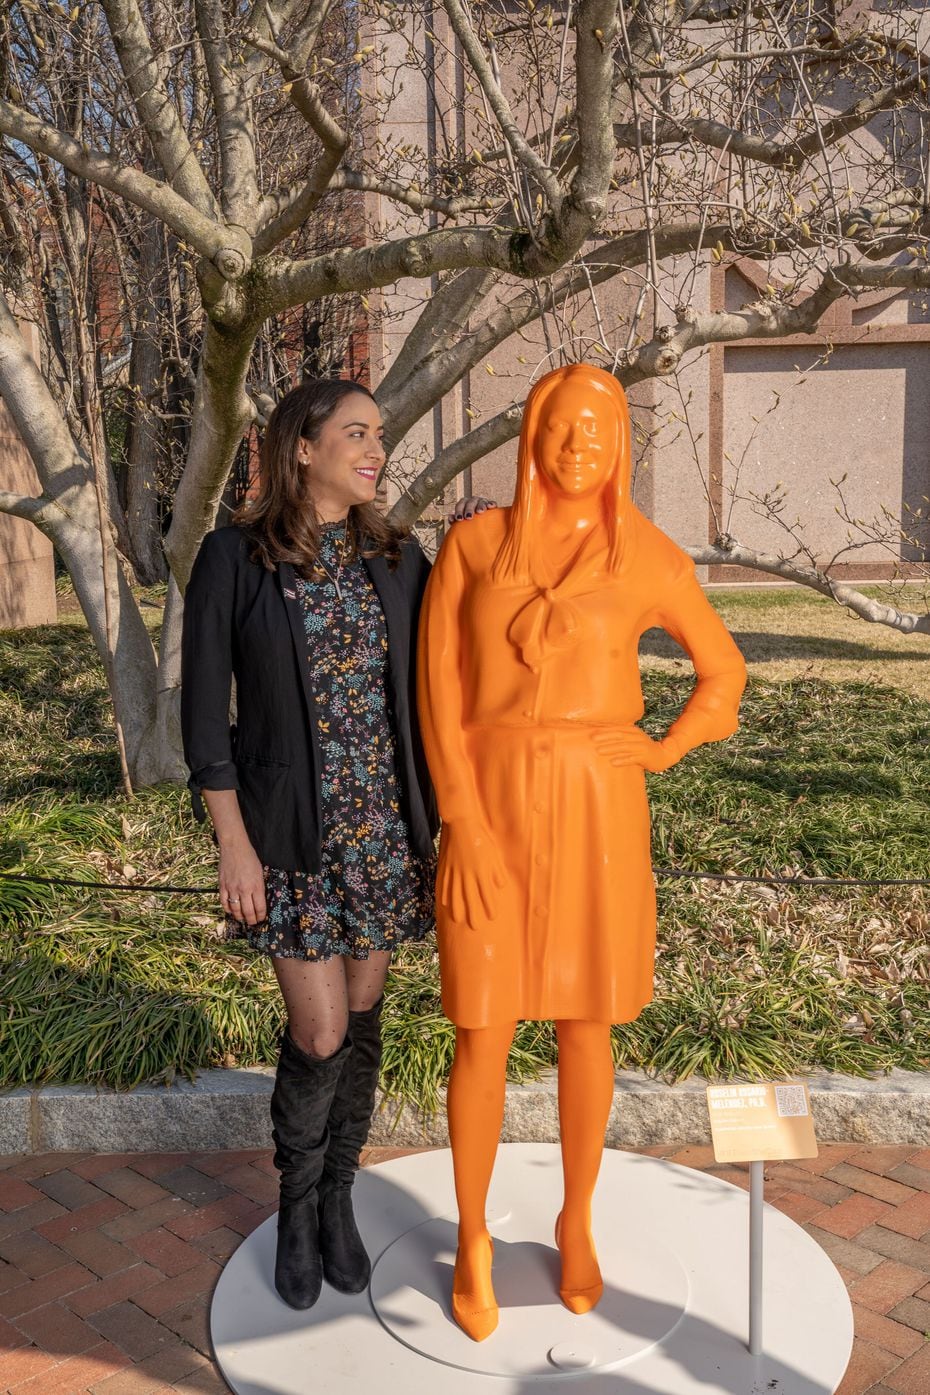 Polymer chemist Roselin Rosario-Melendez stands next to her statue that was created for...